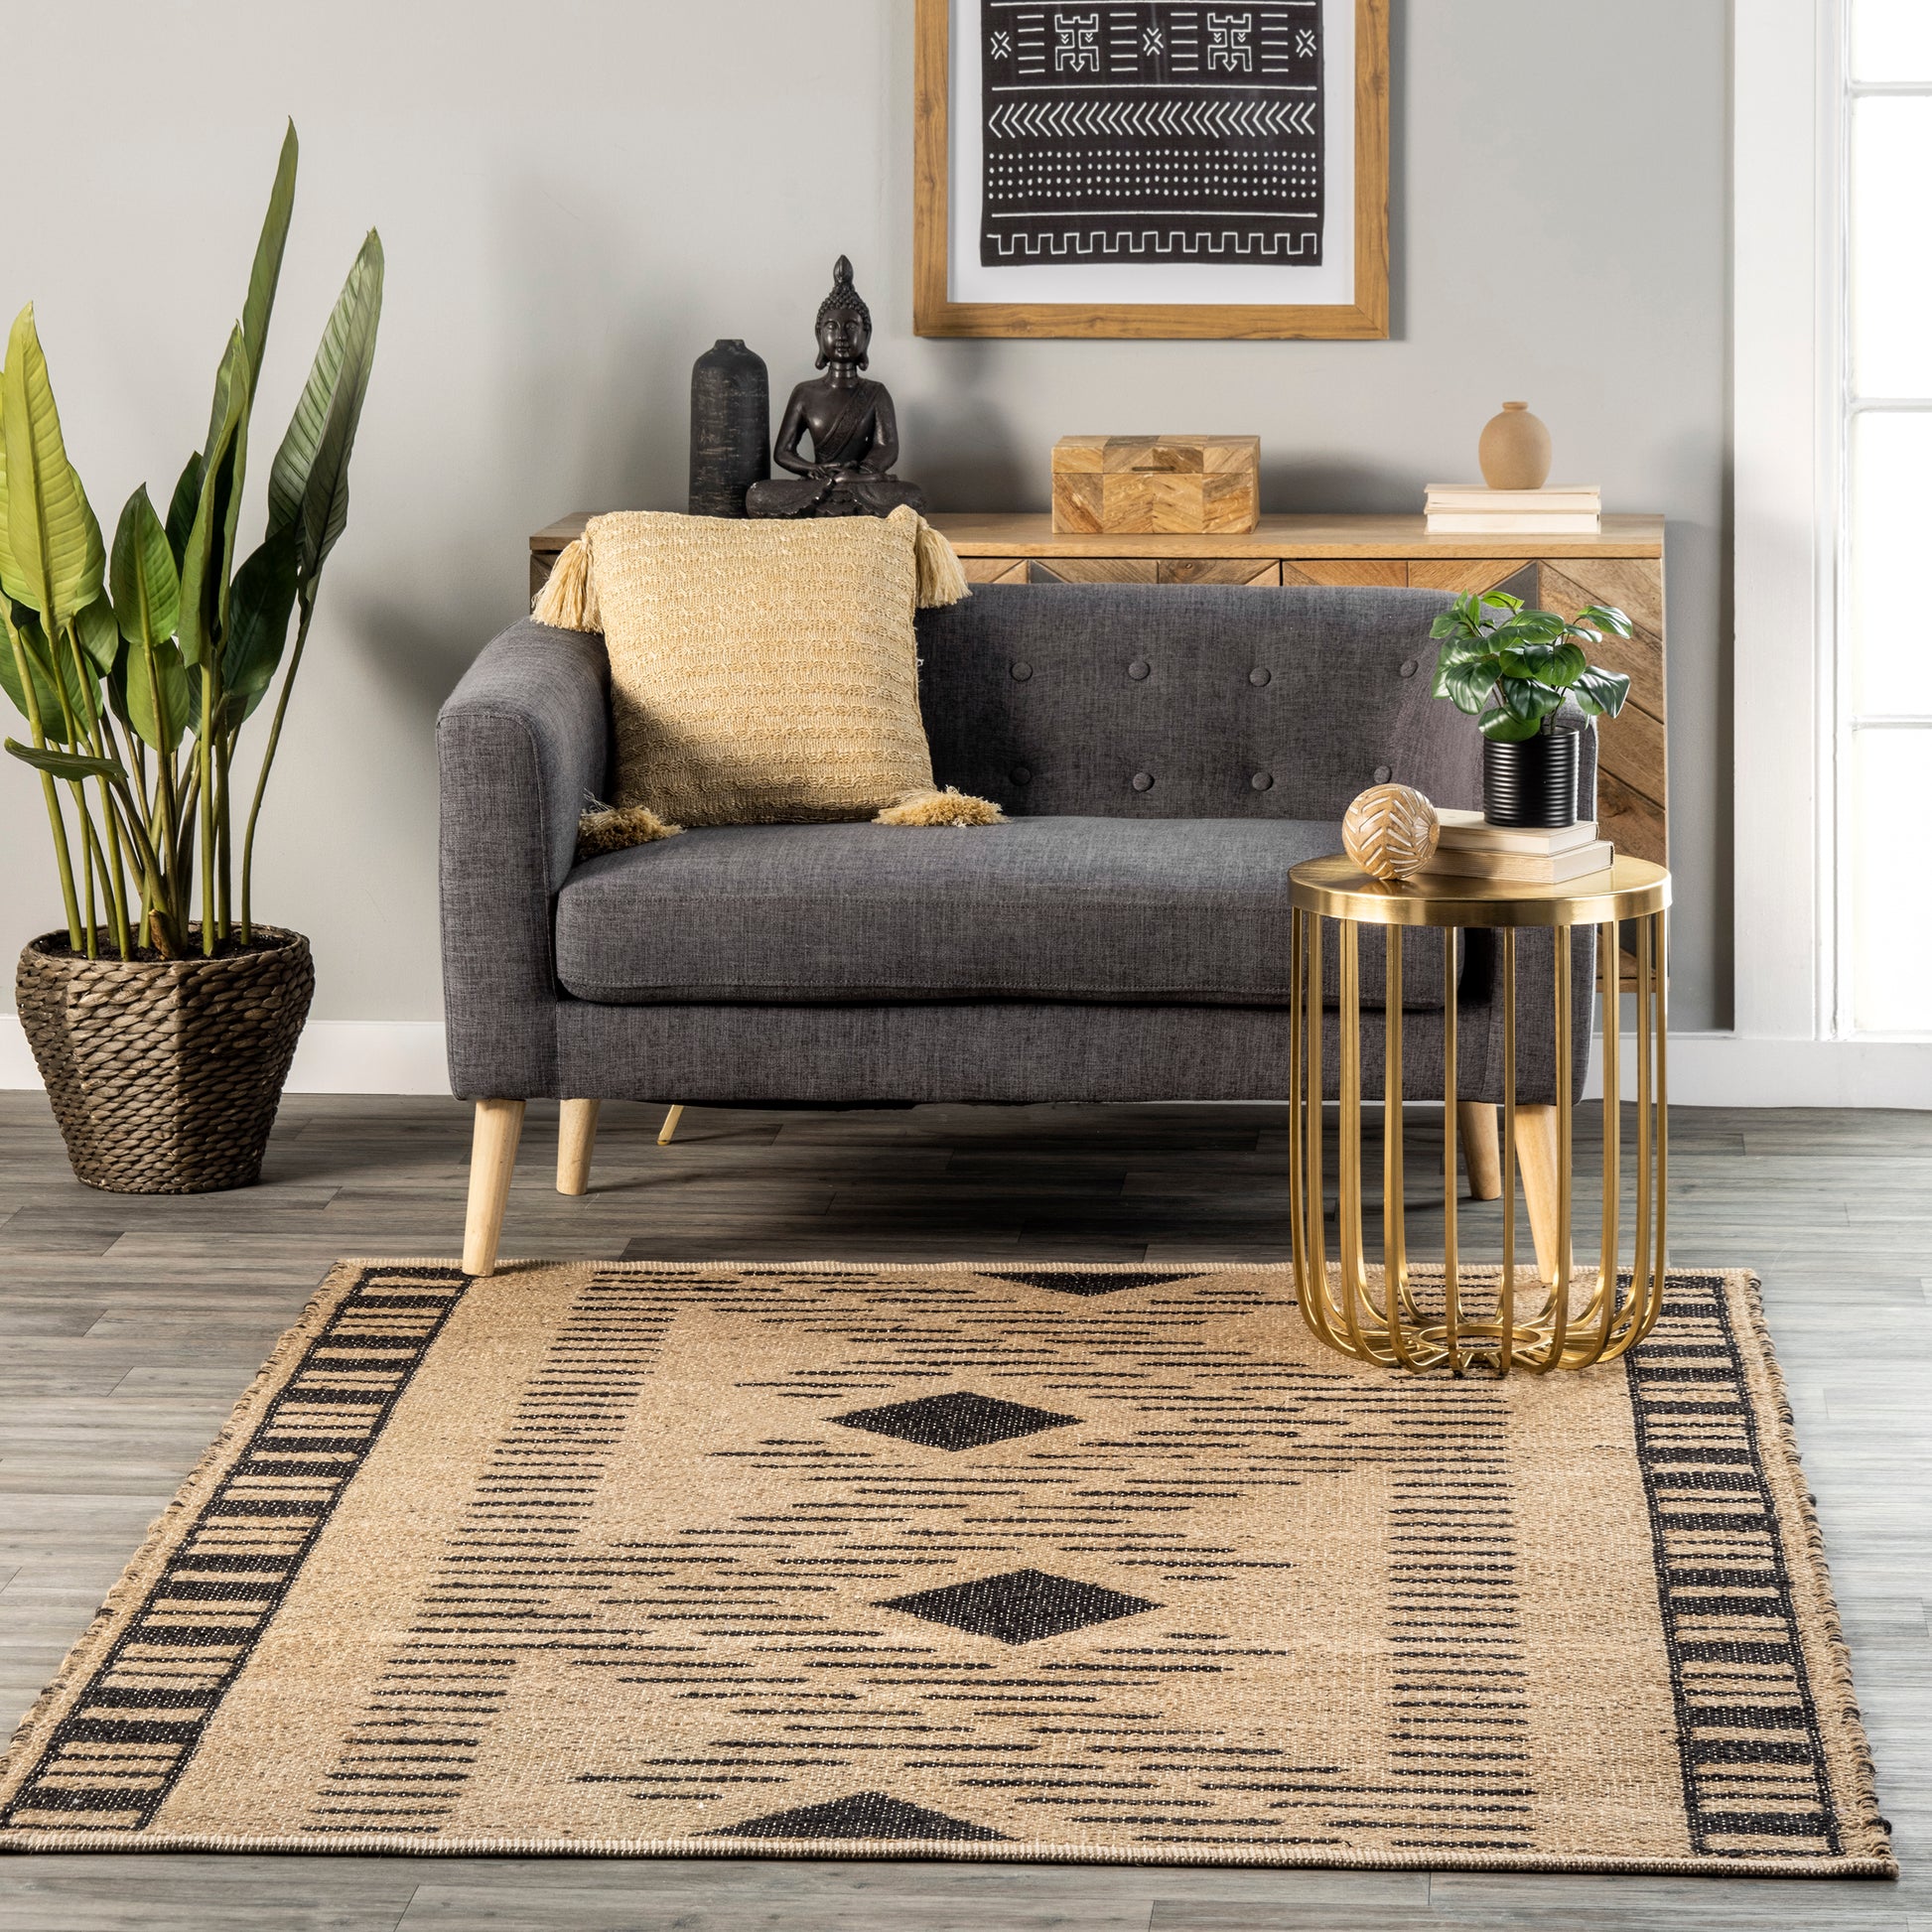 Nuloom Ranae Tribal Zigzag Nra3507A Natural Area Rug